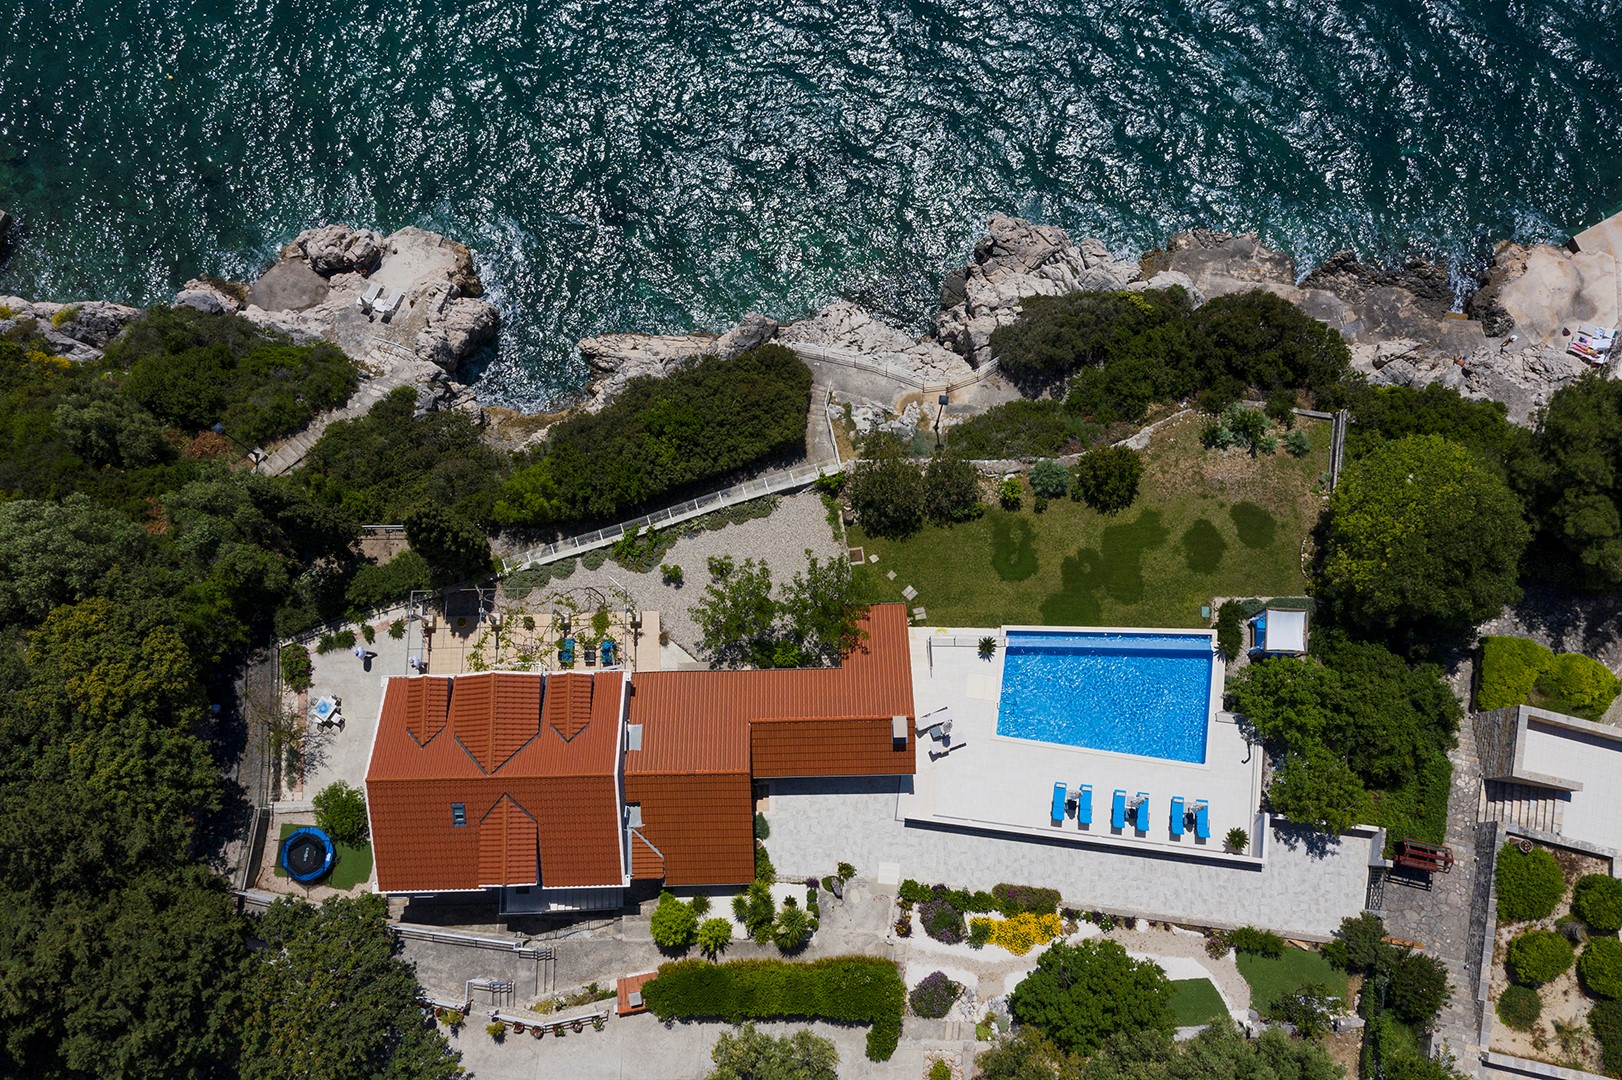 DUBROVNIK LUXURY VILLA with Private Pool, Private Parking, and WI-FI